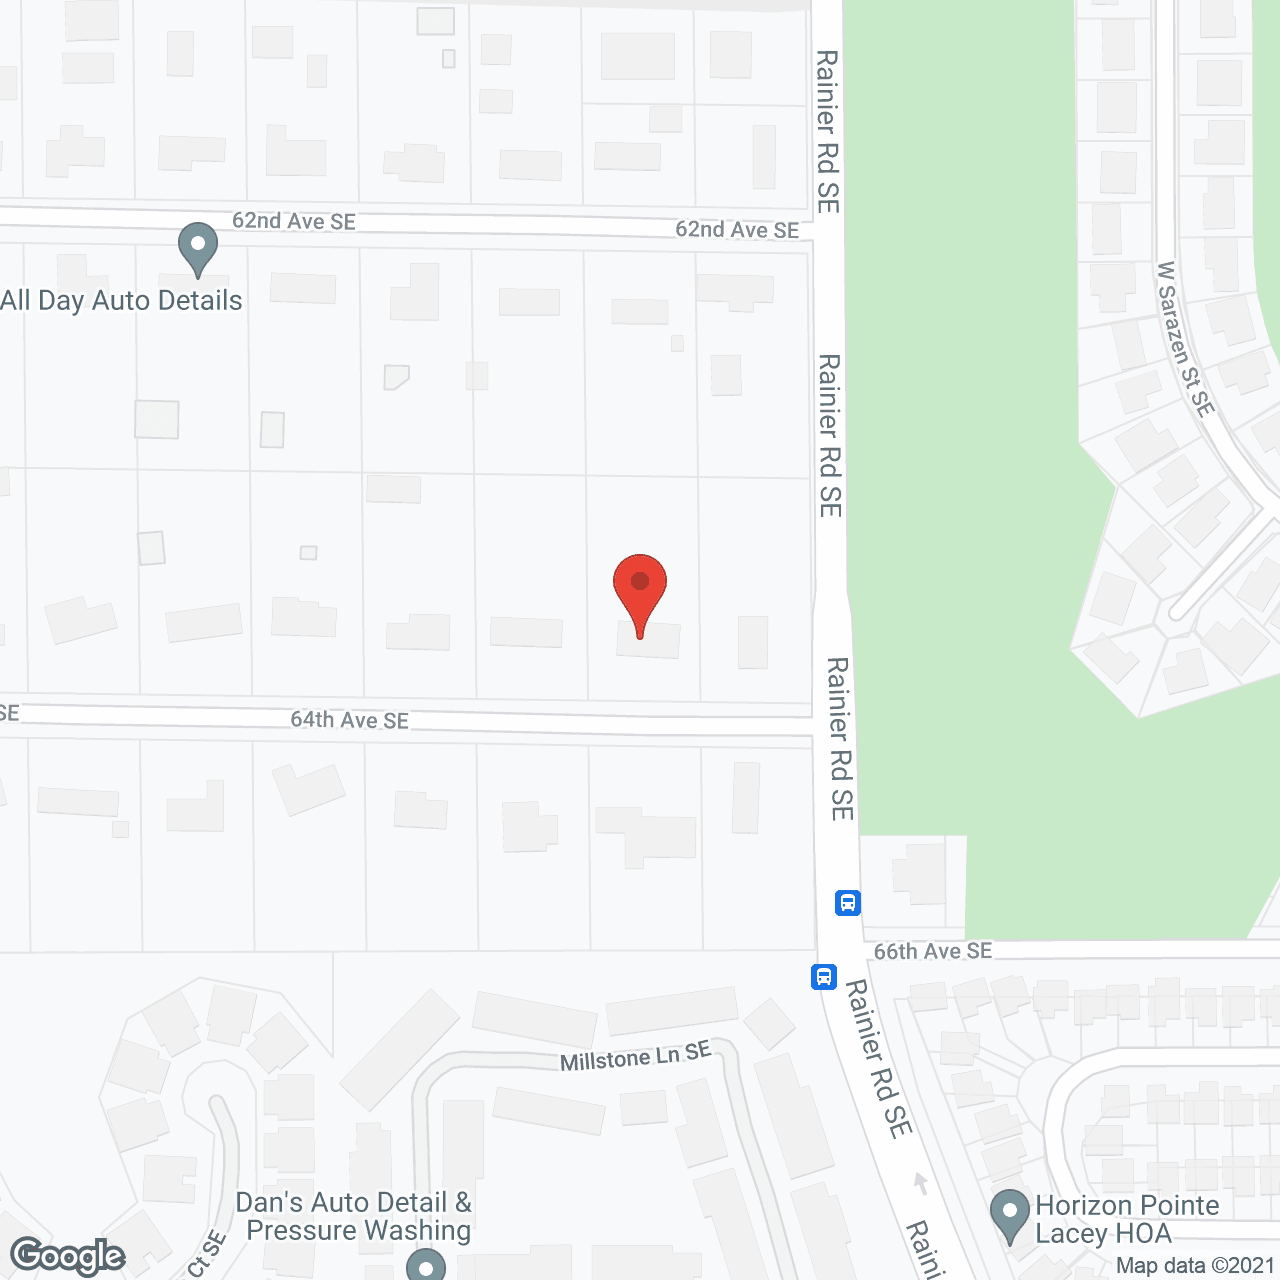 Quality Care Adult Family Home in google map